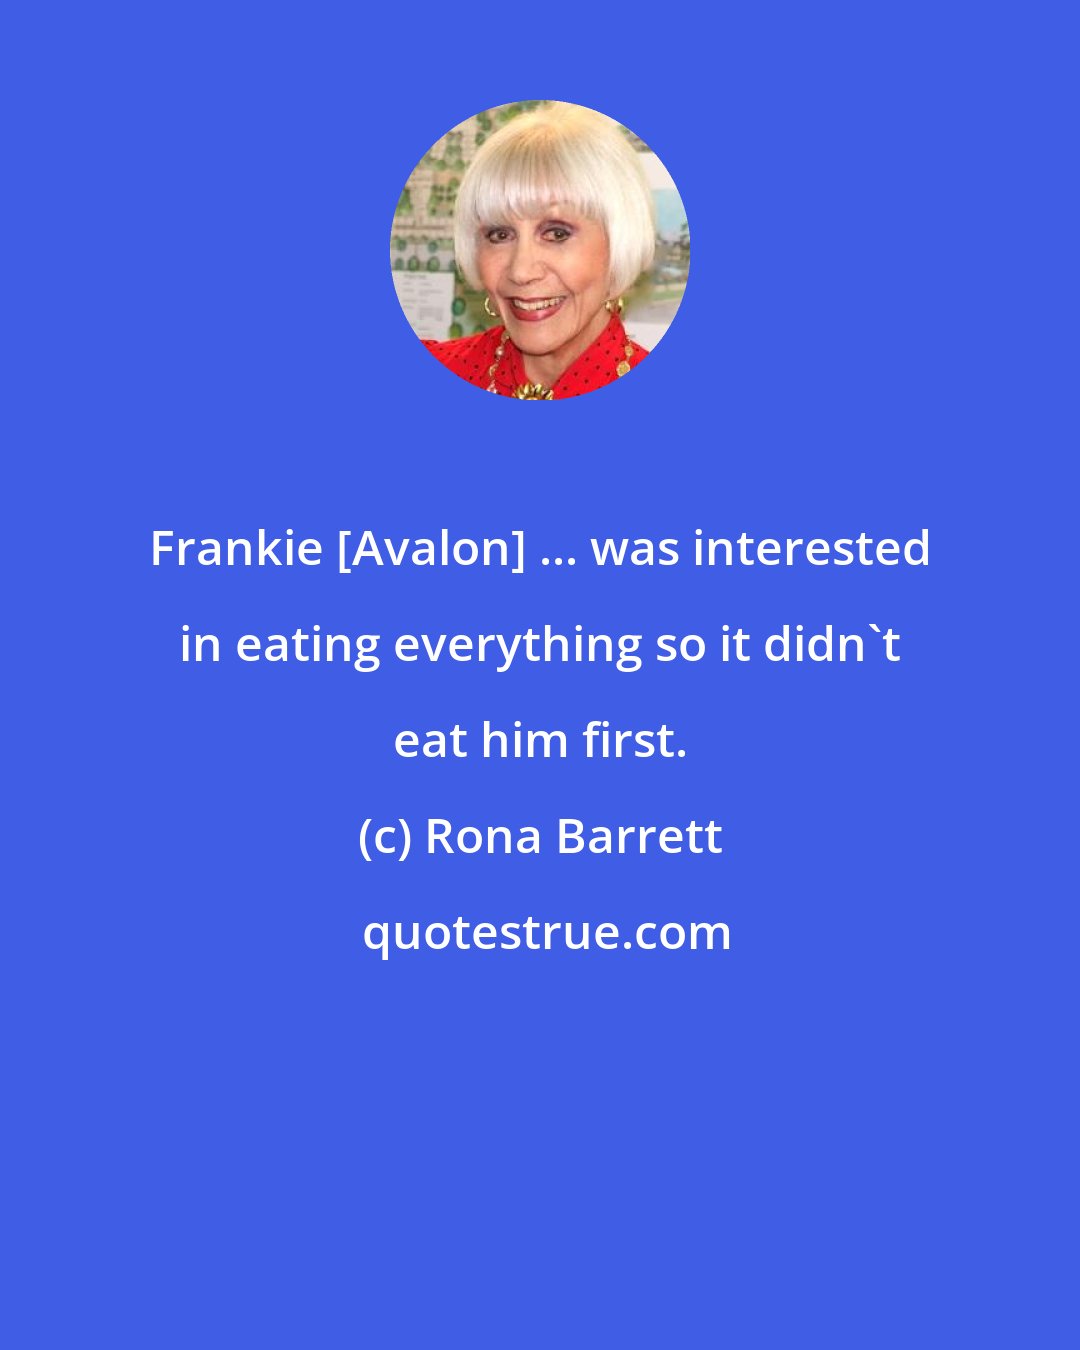 Rona Barrett: Frankie [Avalon] ... was interested in eating everything so it didn't eat him first.